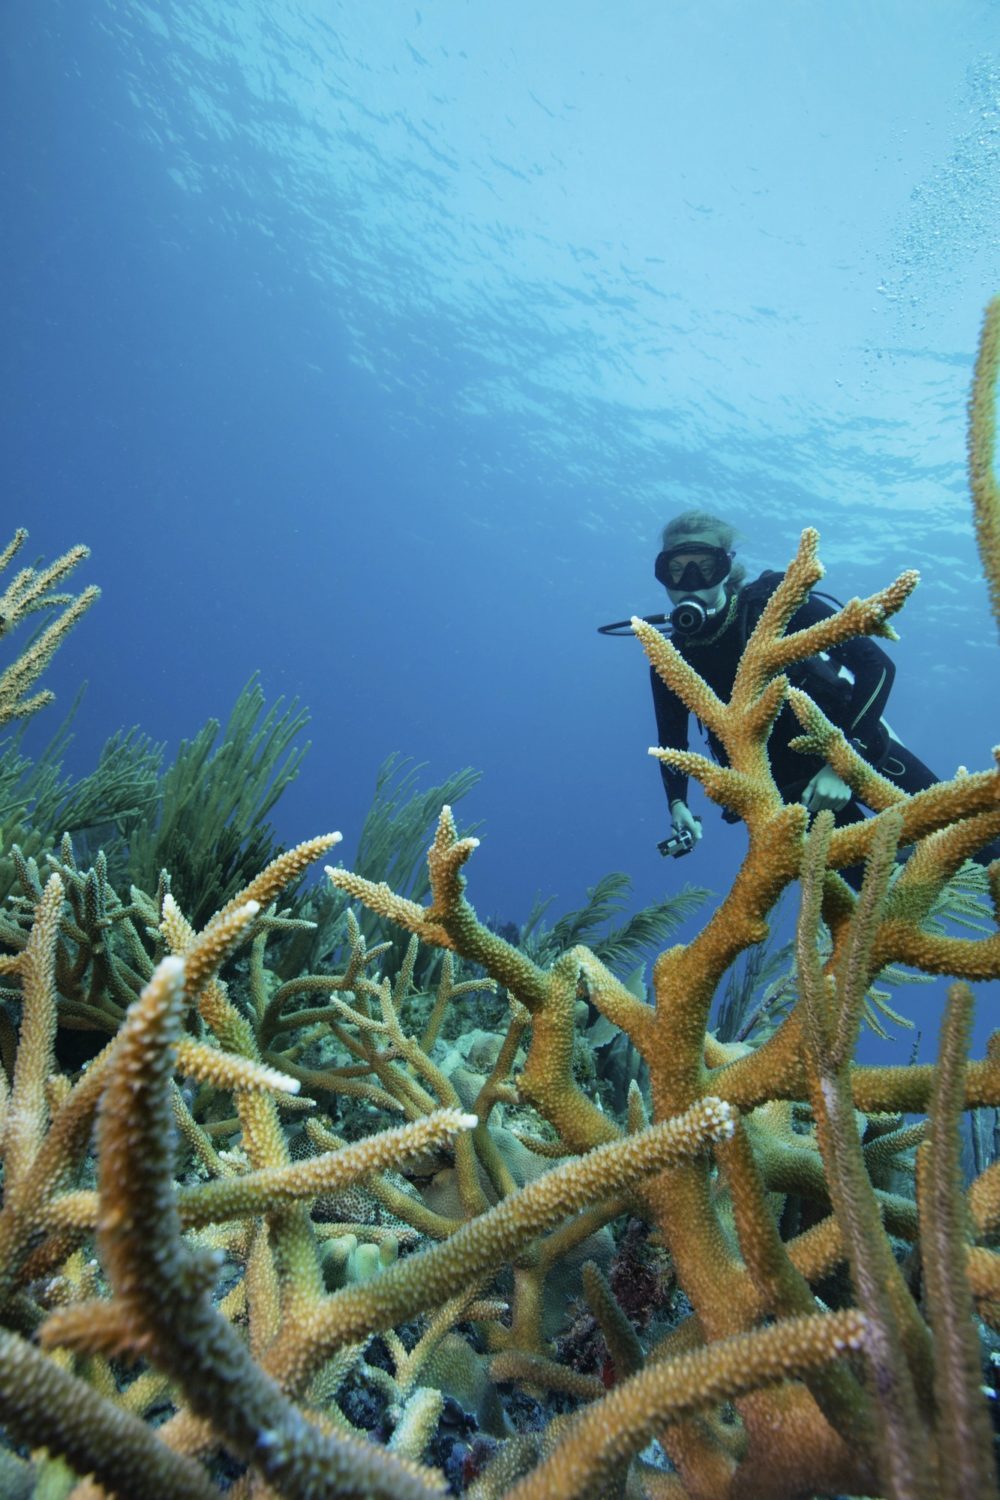 reef-scene-with-scuba-diver-and-staghorn-coral-e1634535828132.jpg